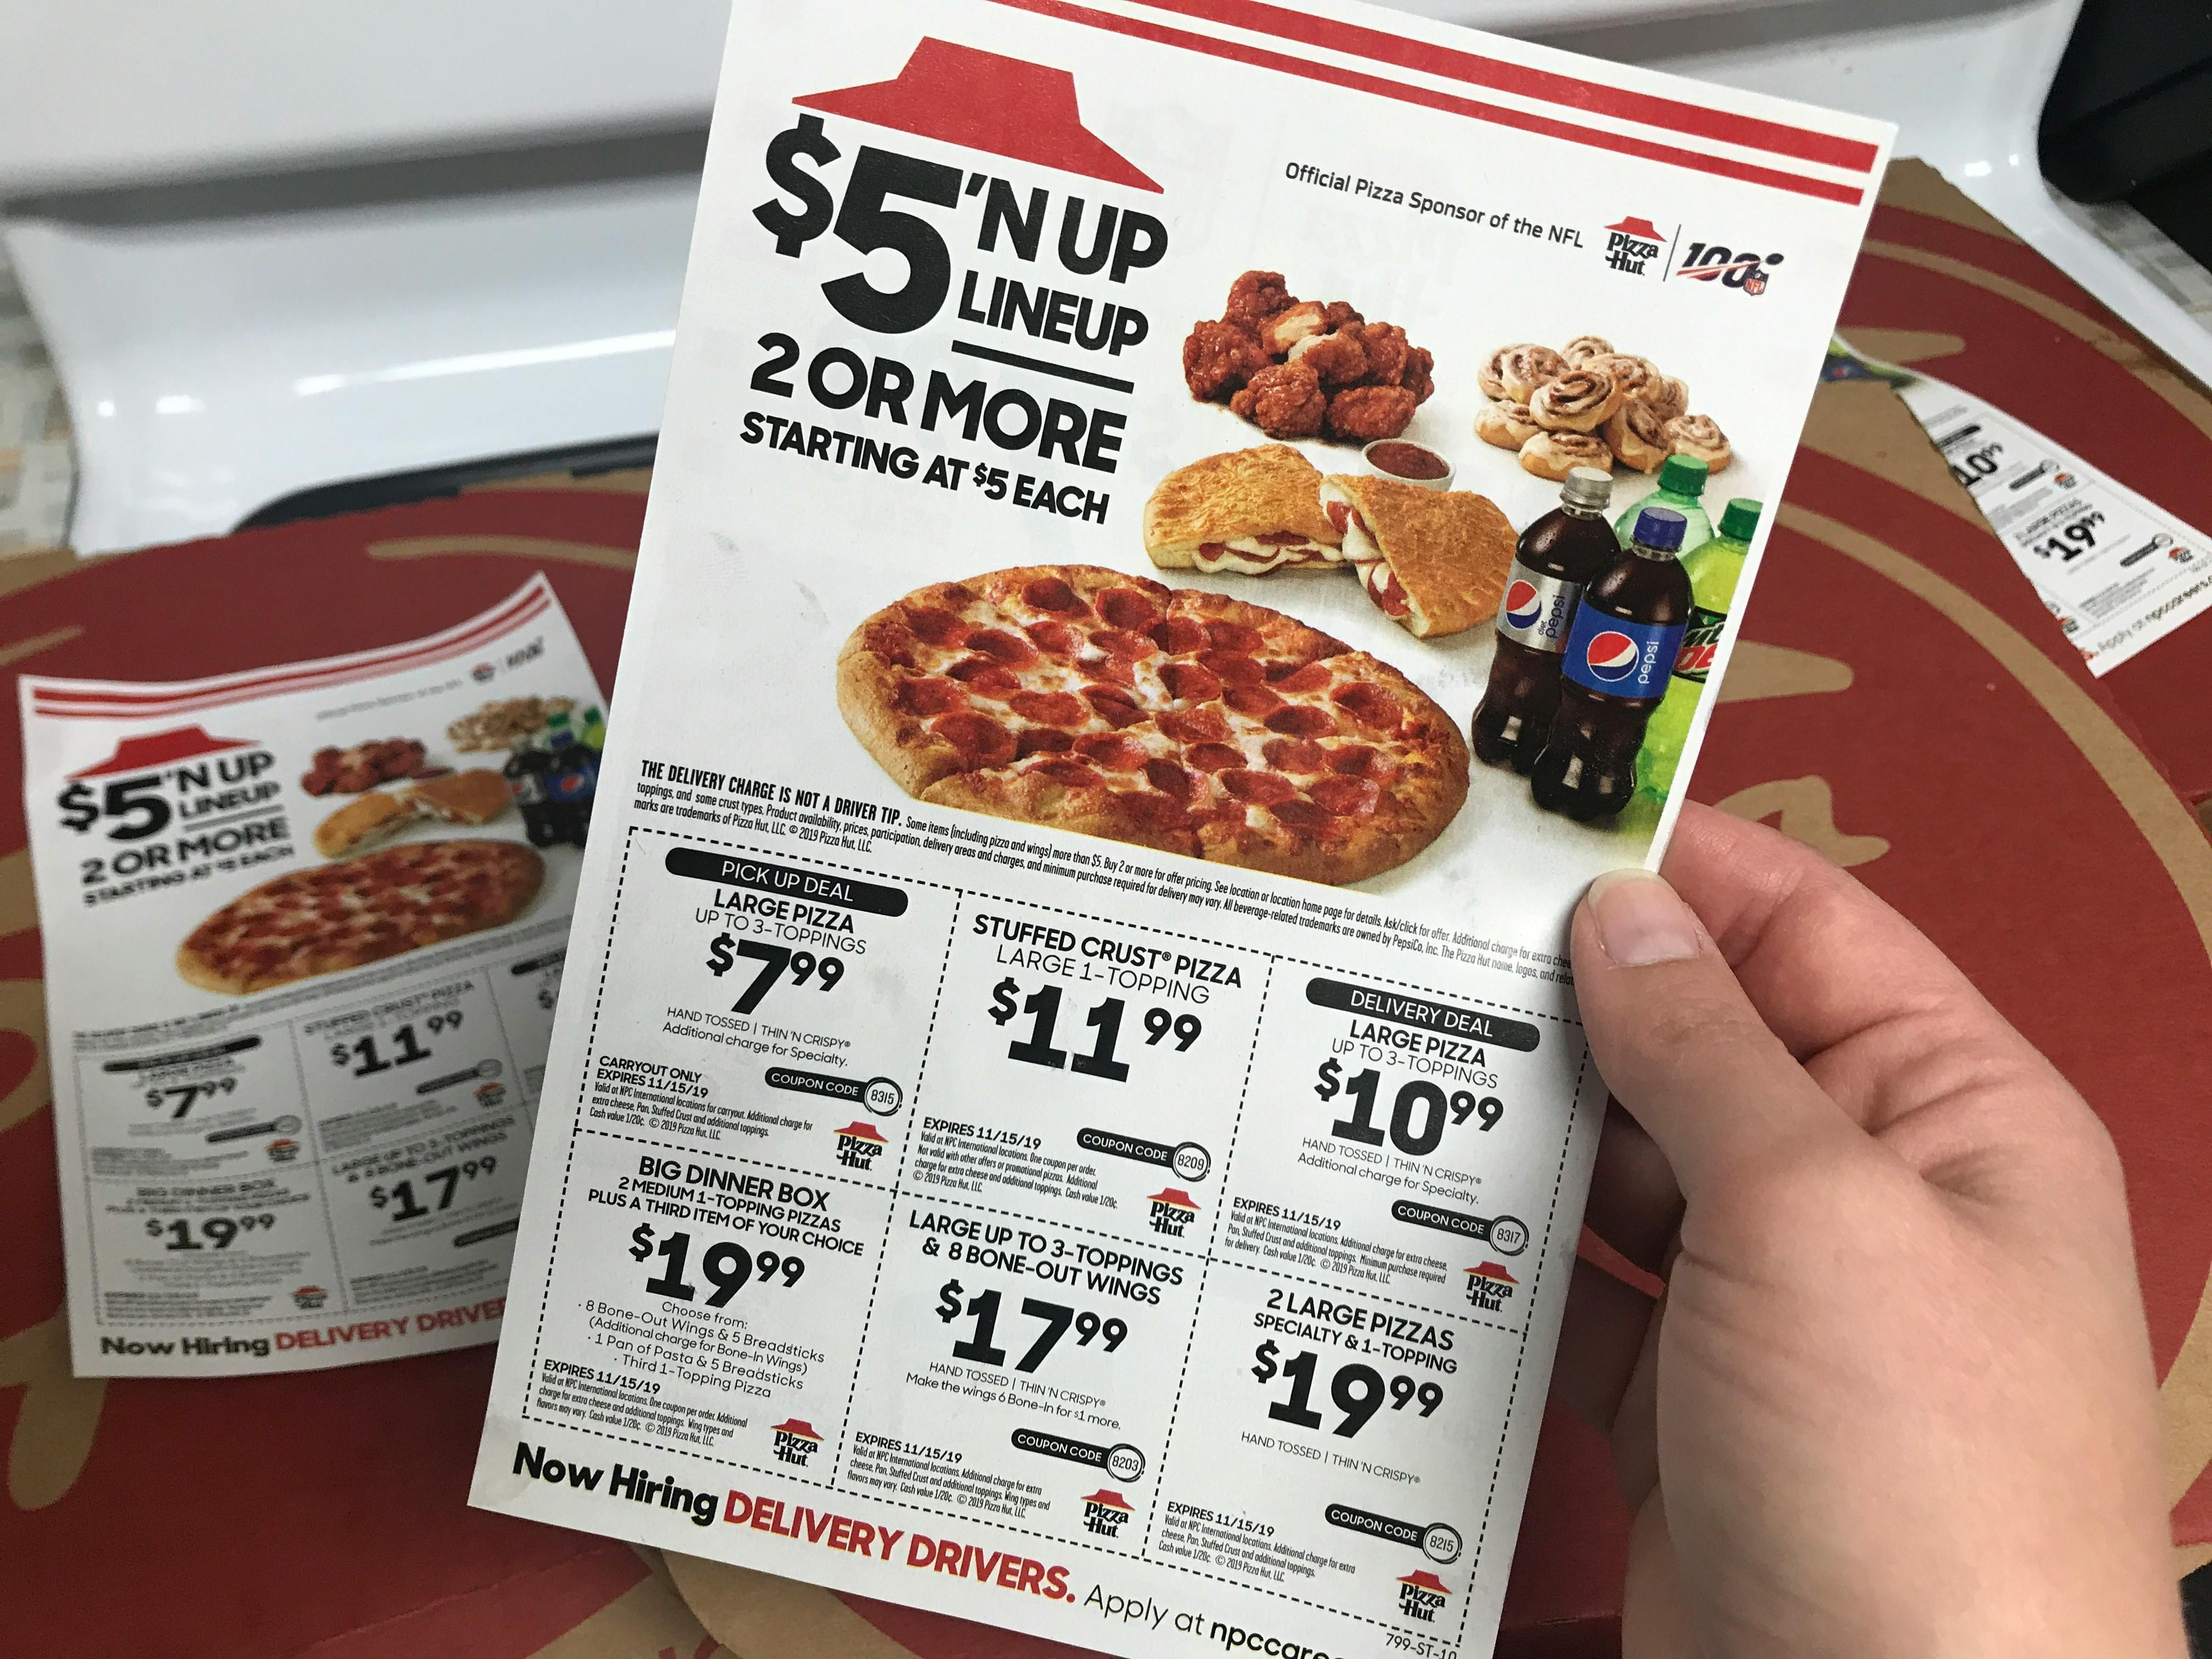 13-pizza-hut-deals-and-savings-tricks-you-can-t-live-without-the